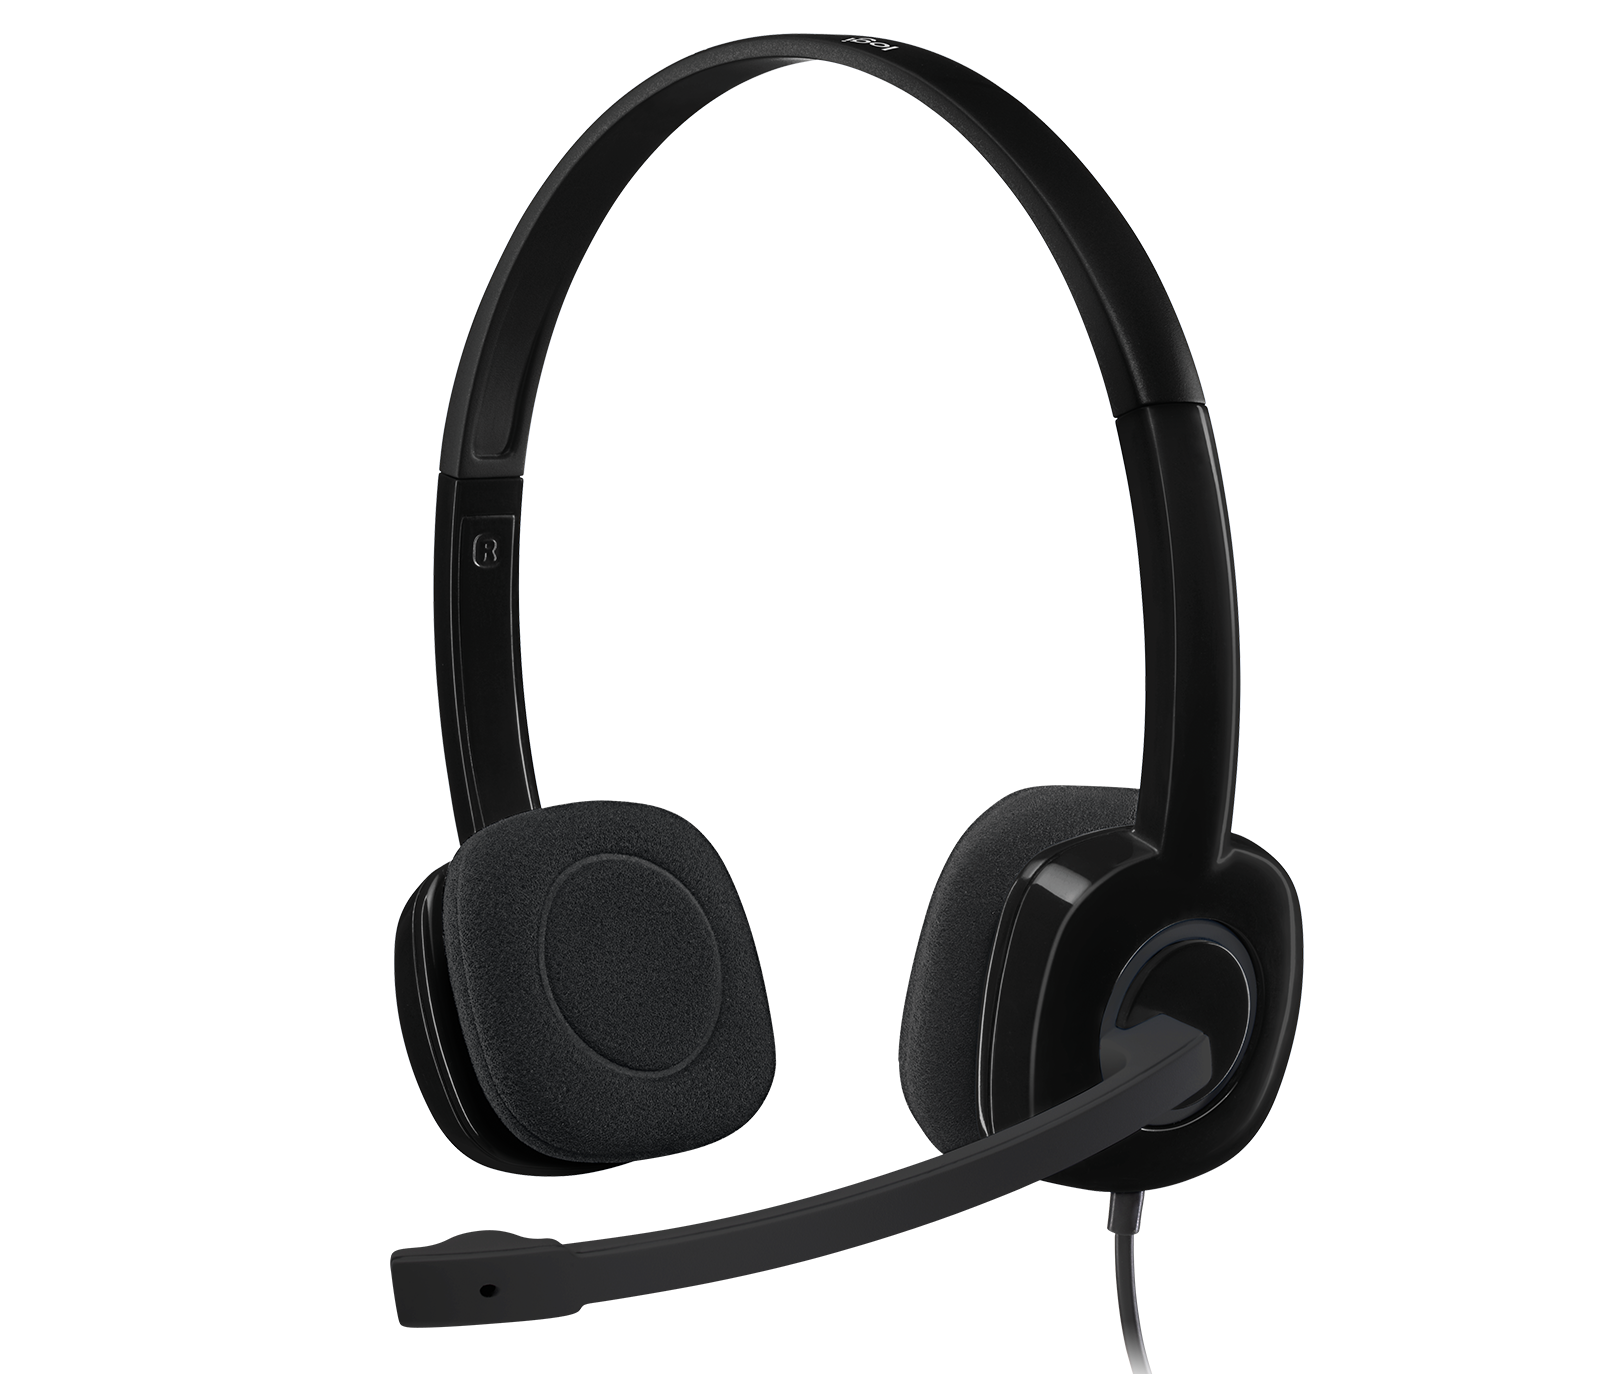 Image of H151 Stereo Headset Multi-device headset with in-line controls - Black